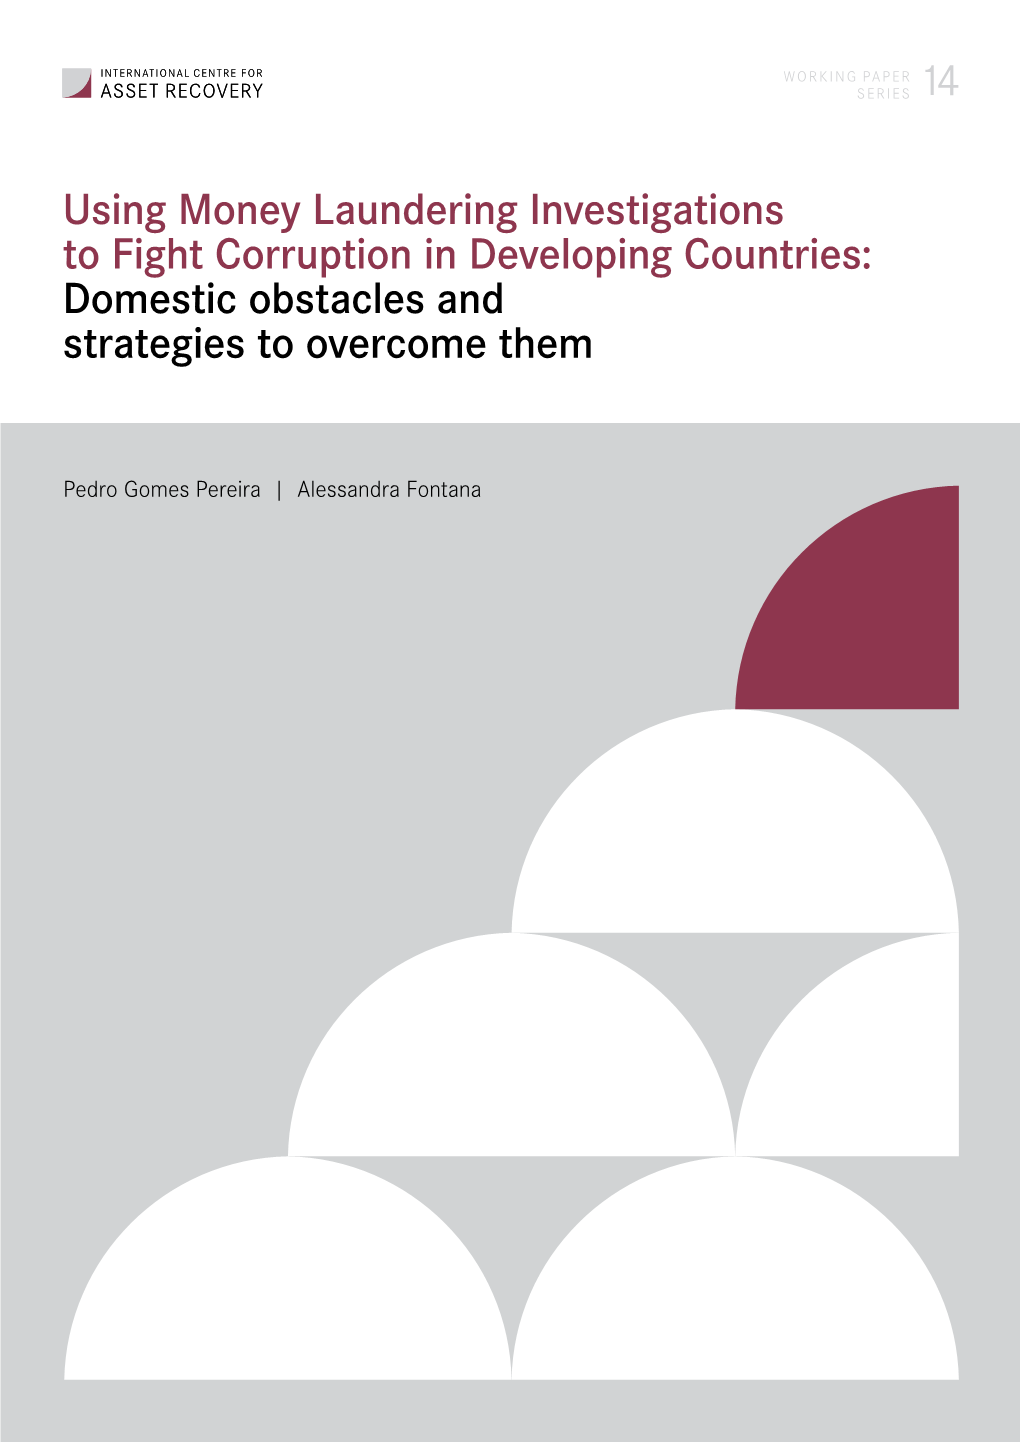 14 Using Money Laundering Investigations to Fight Corruption in Developing Countries: Domestic Obstacles and Strategies to Overcome Them